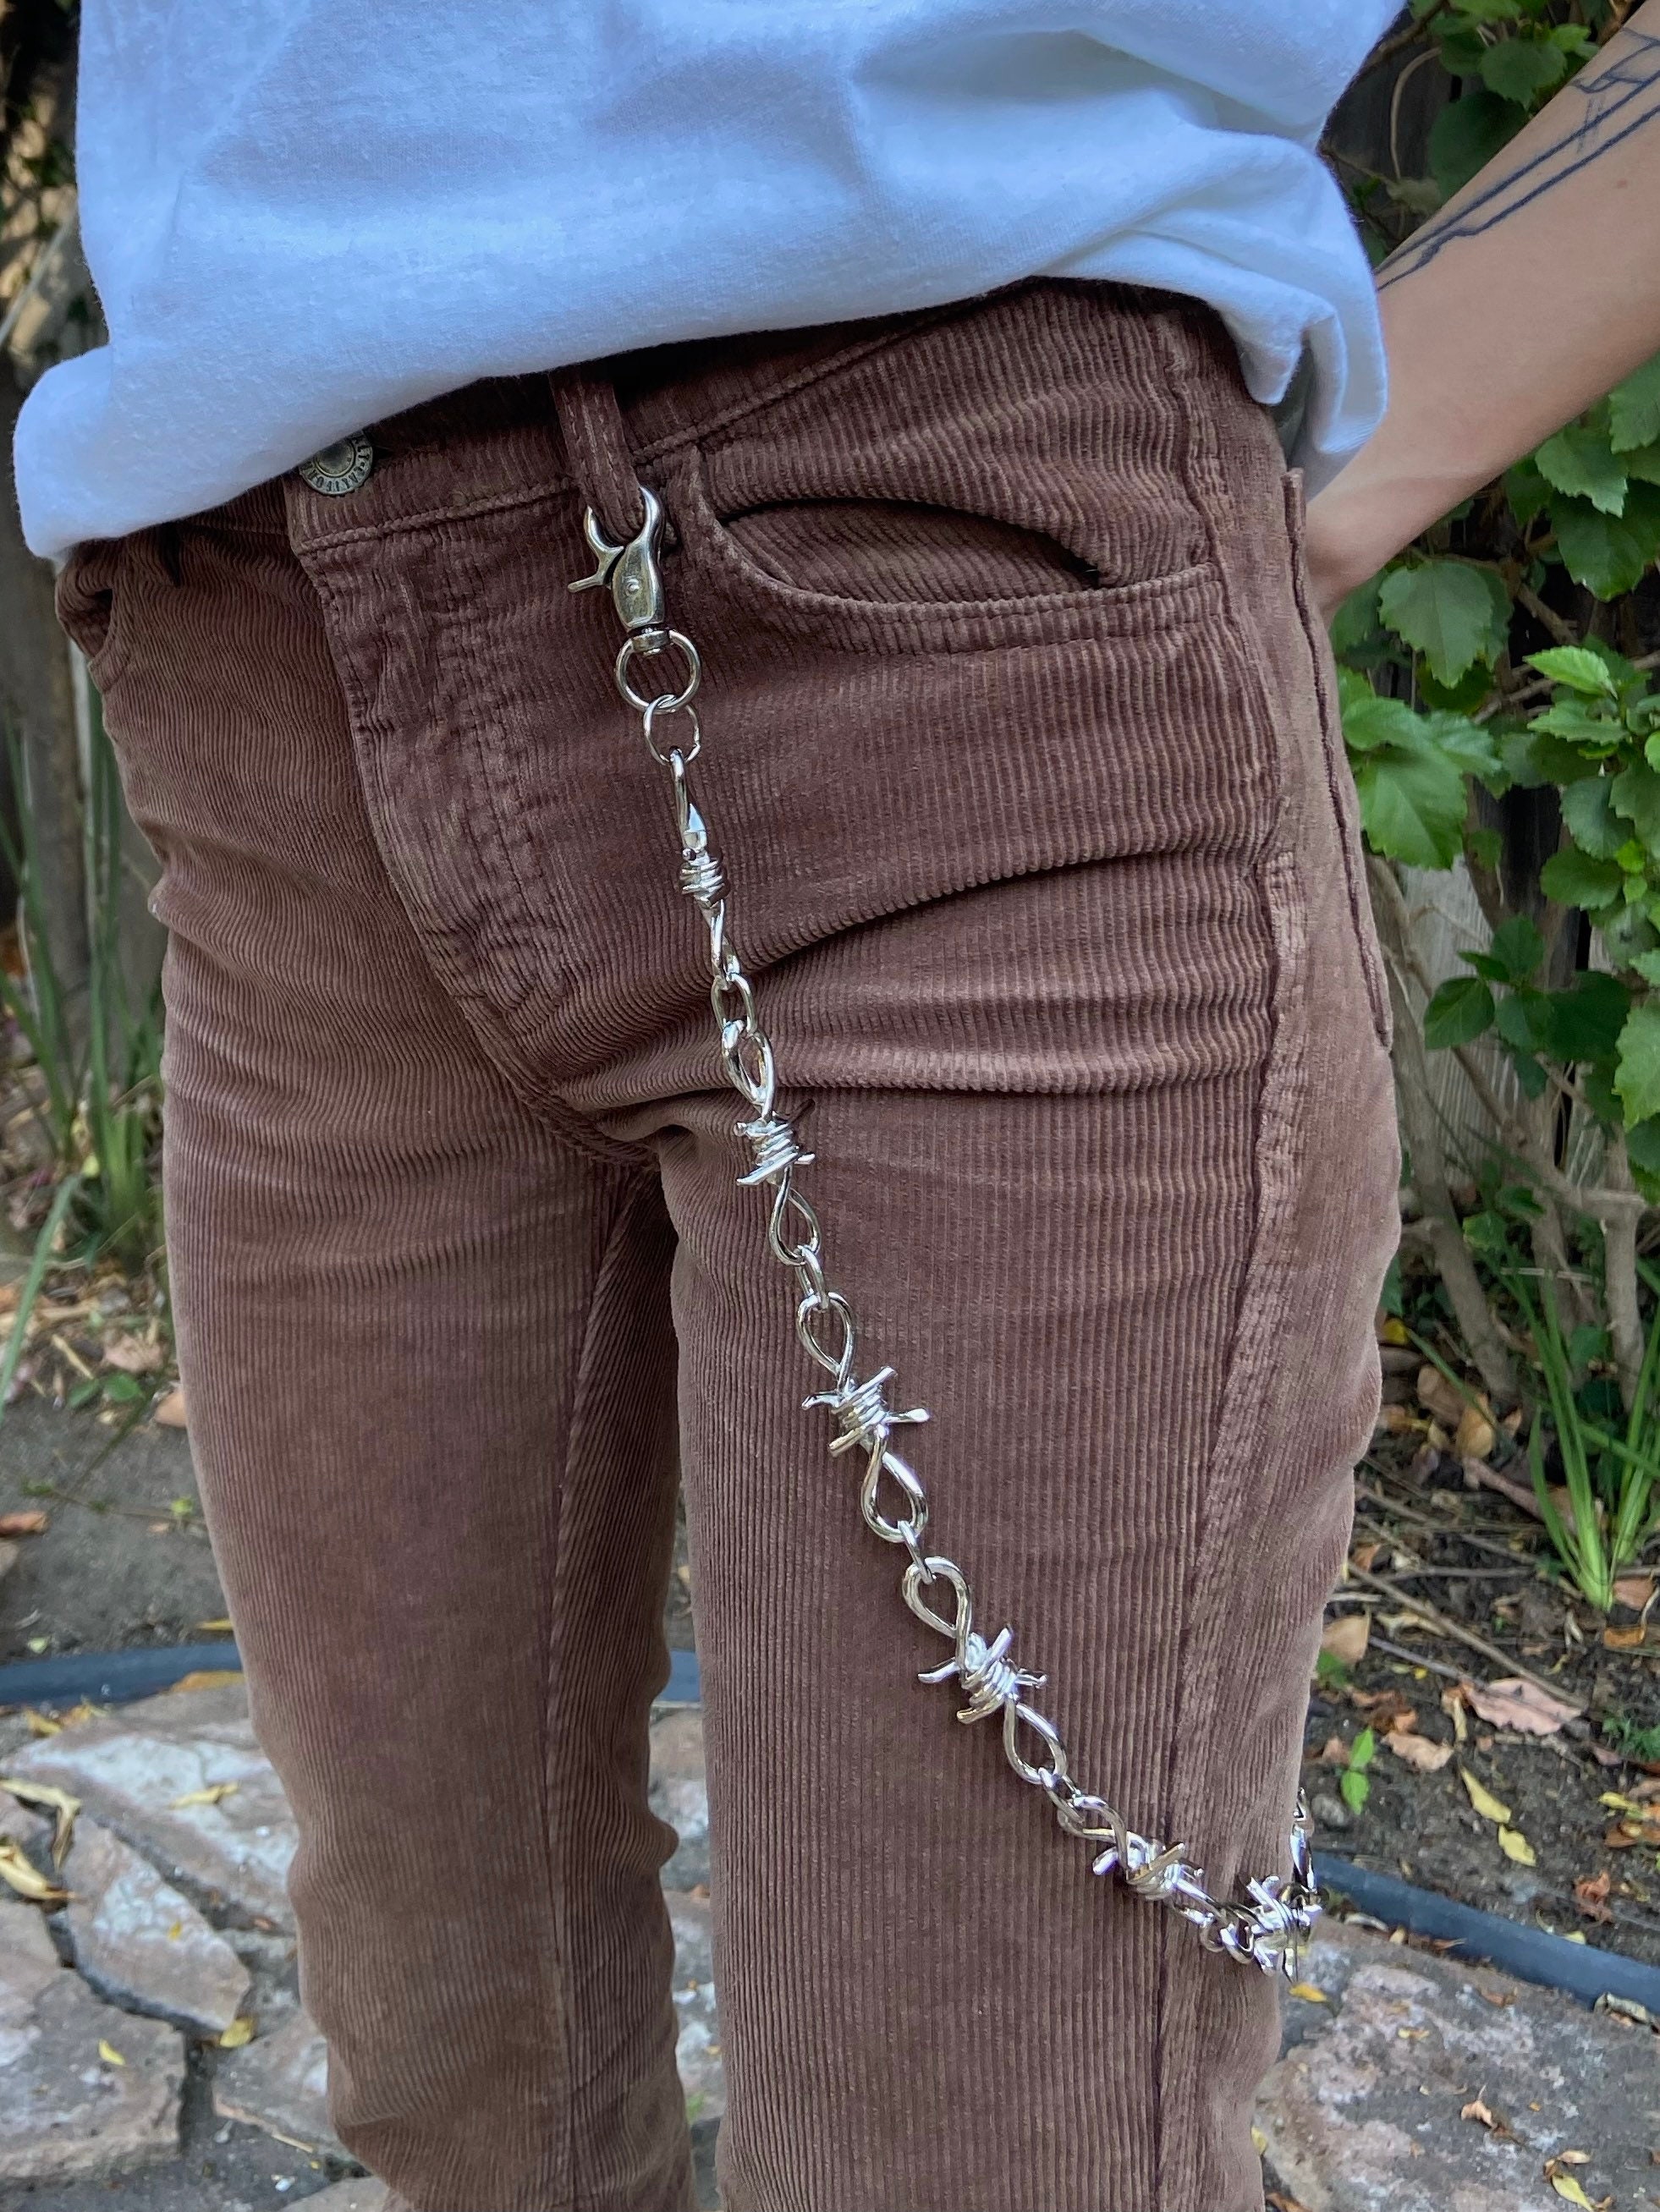 Handmade Unisex Chunky Barbed Wire Link Chain Wallet Belt Pants